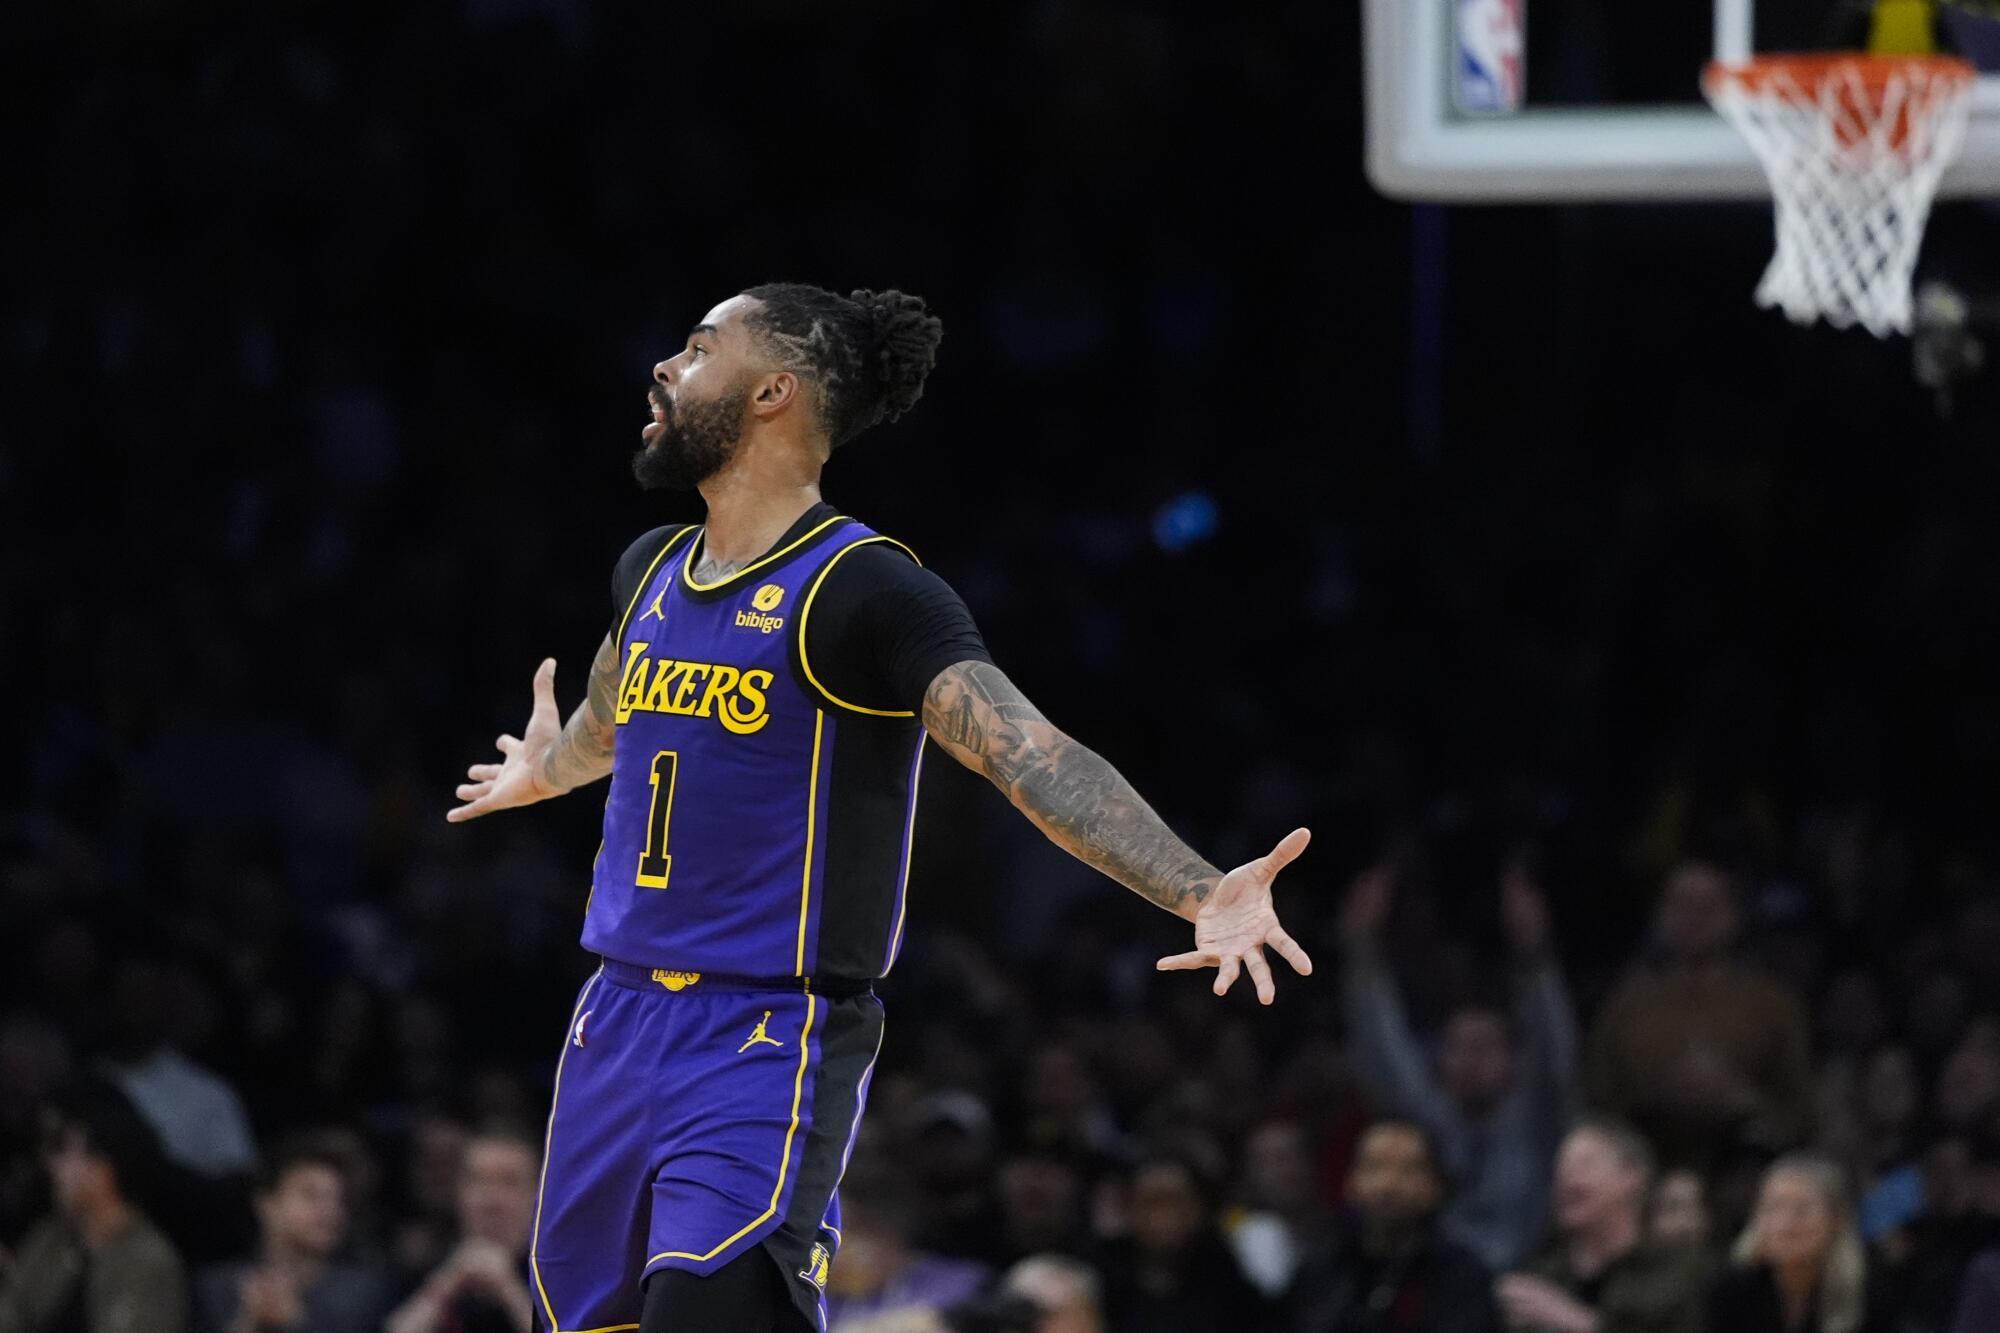 How will Lakers' D'Angelo Russell match up with NBA's elite point